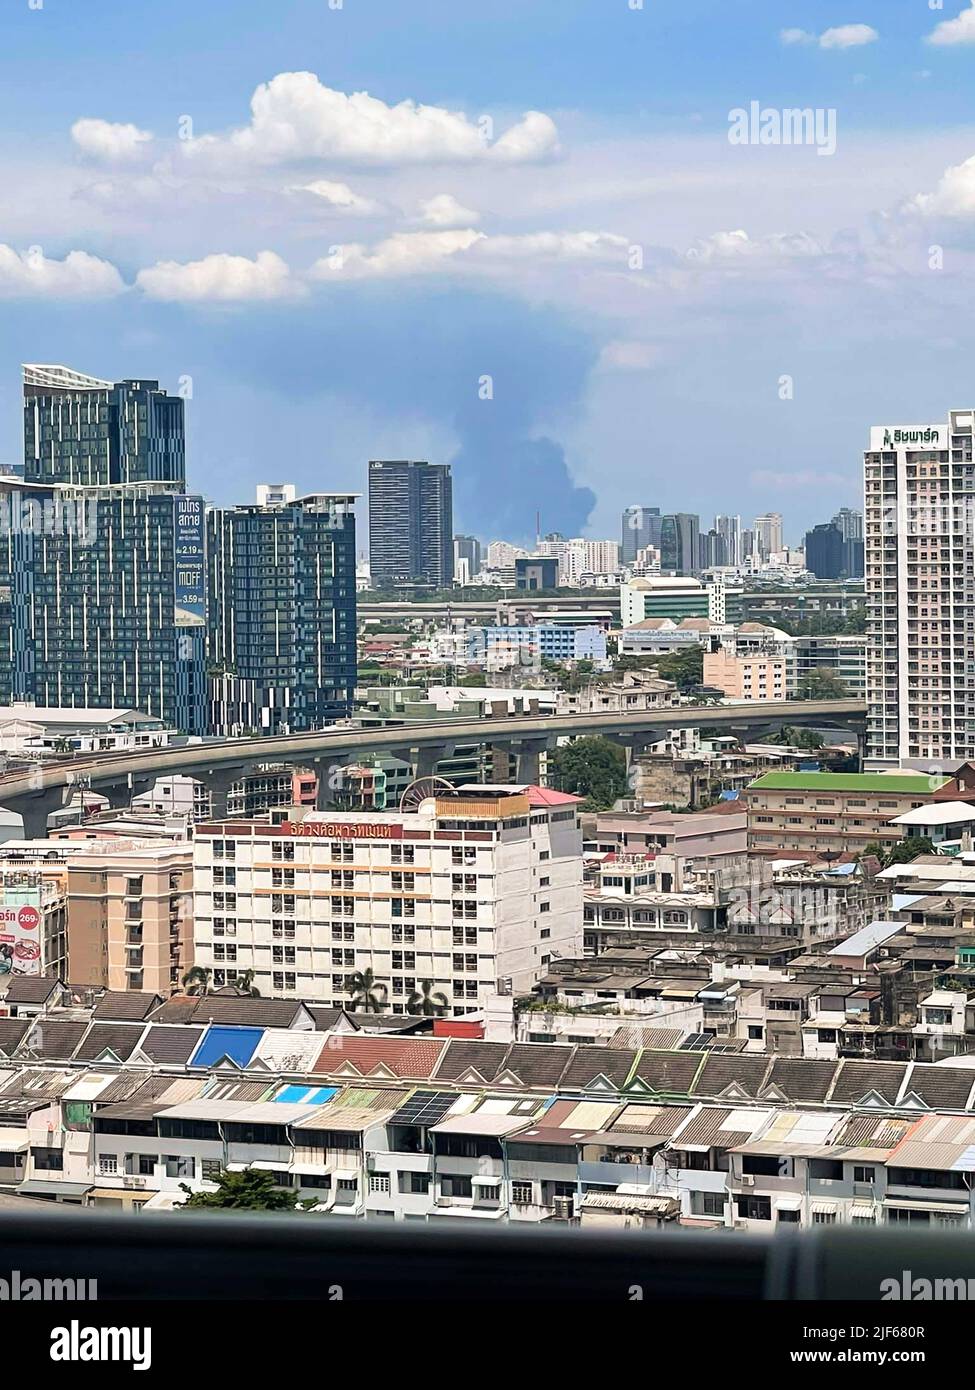 Aerial view of Sathorn, Bangkok Downtown. Financial district and business centers in smart urban city in Asia. Stock Photo